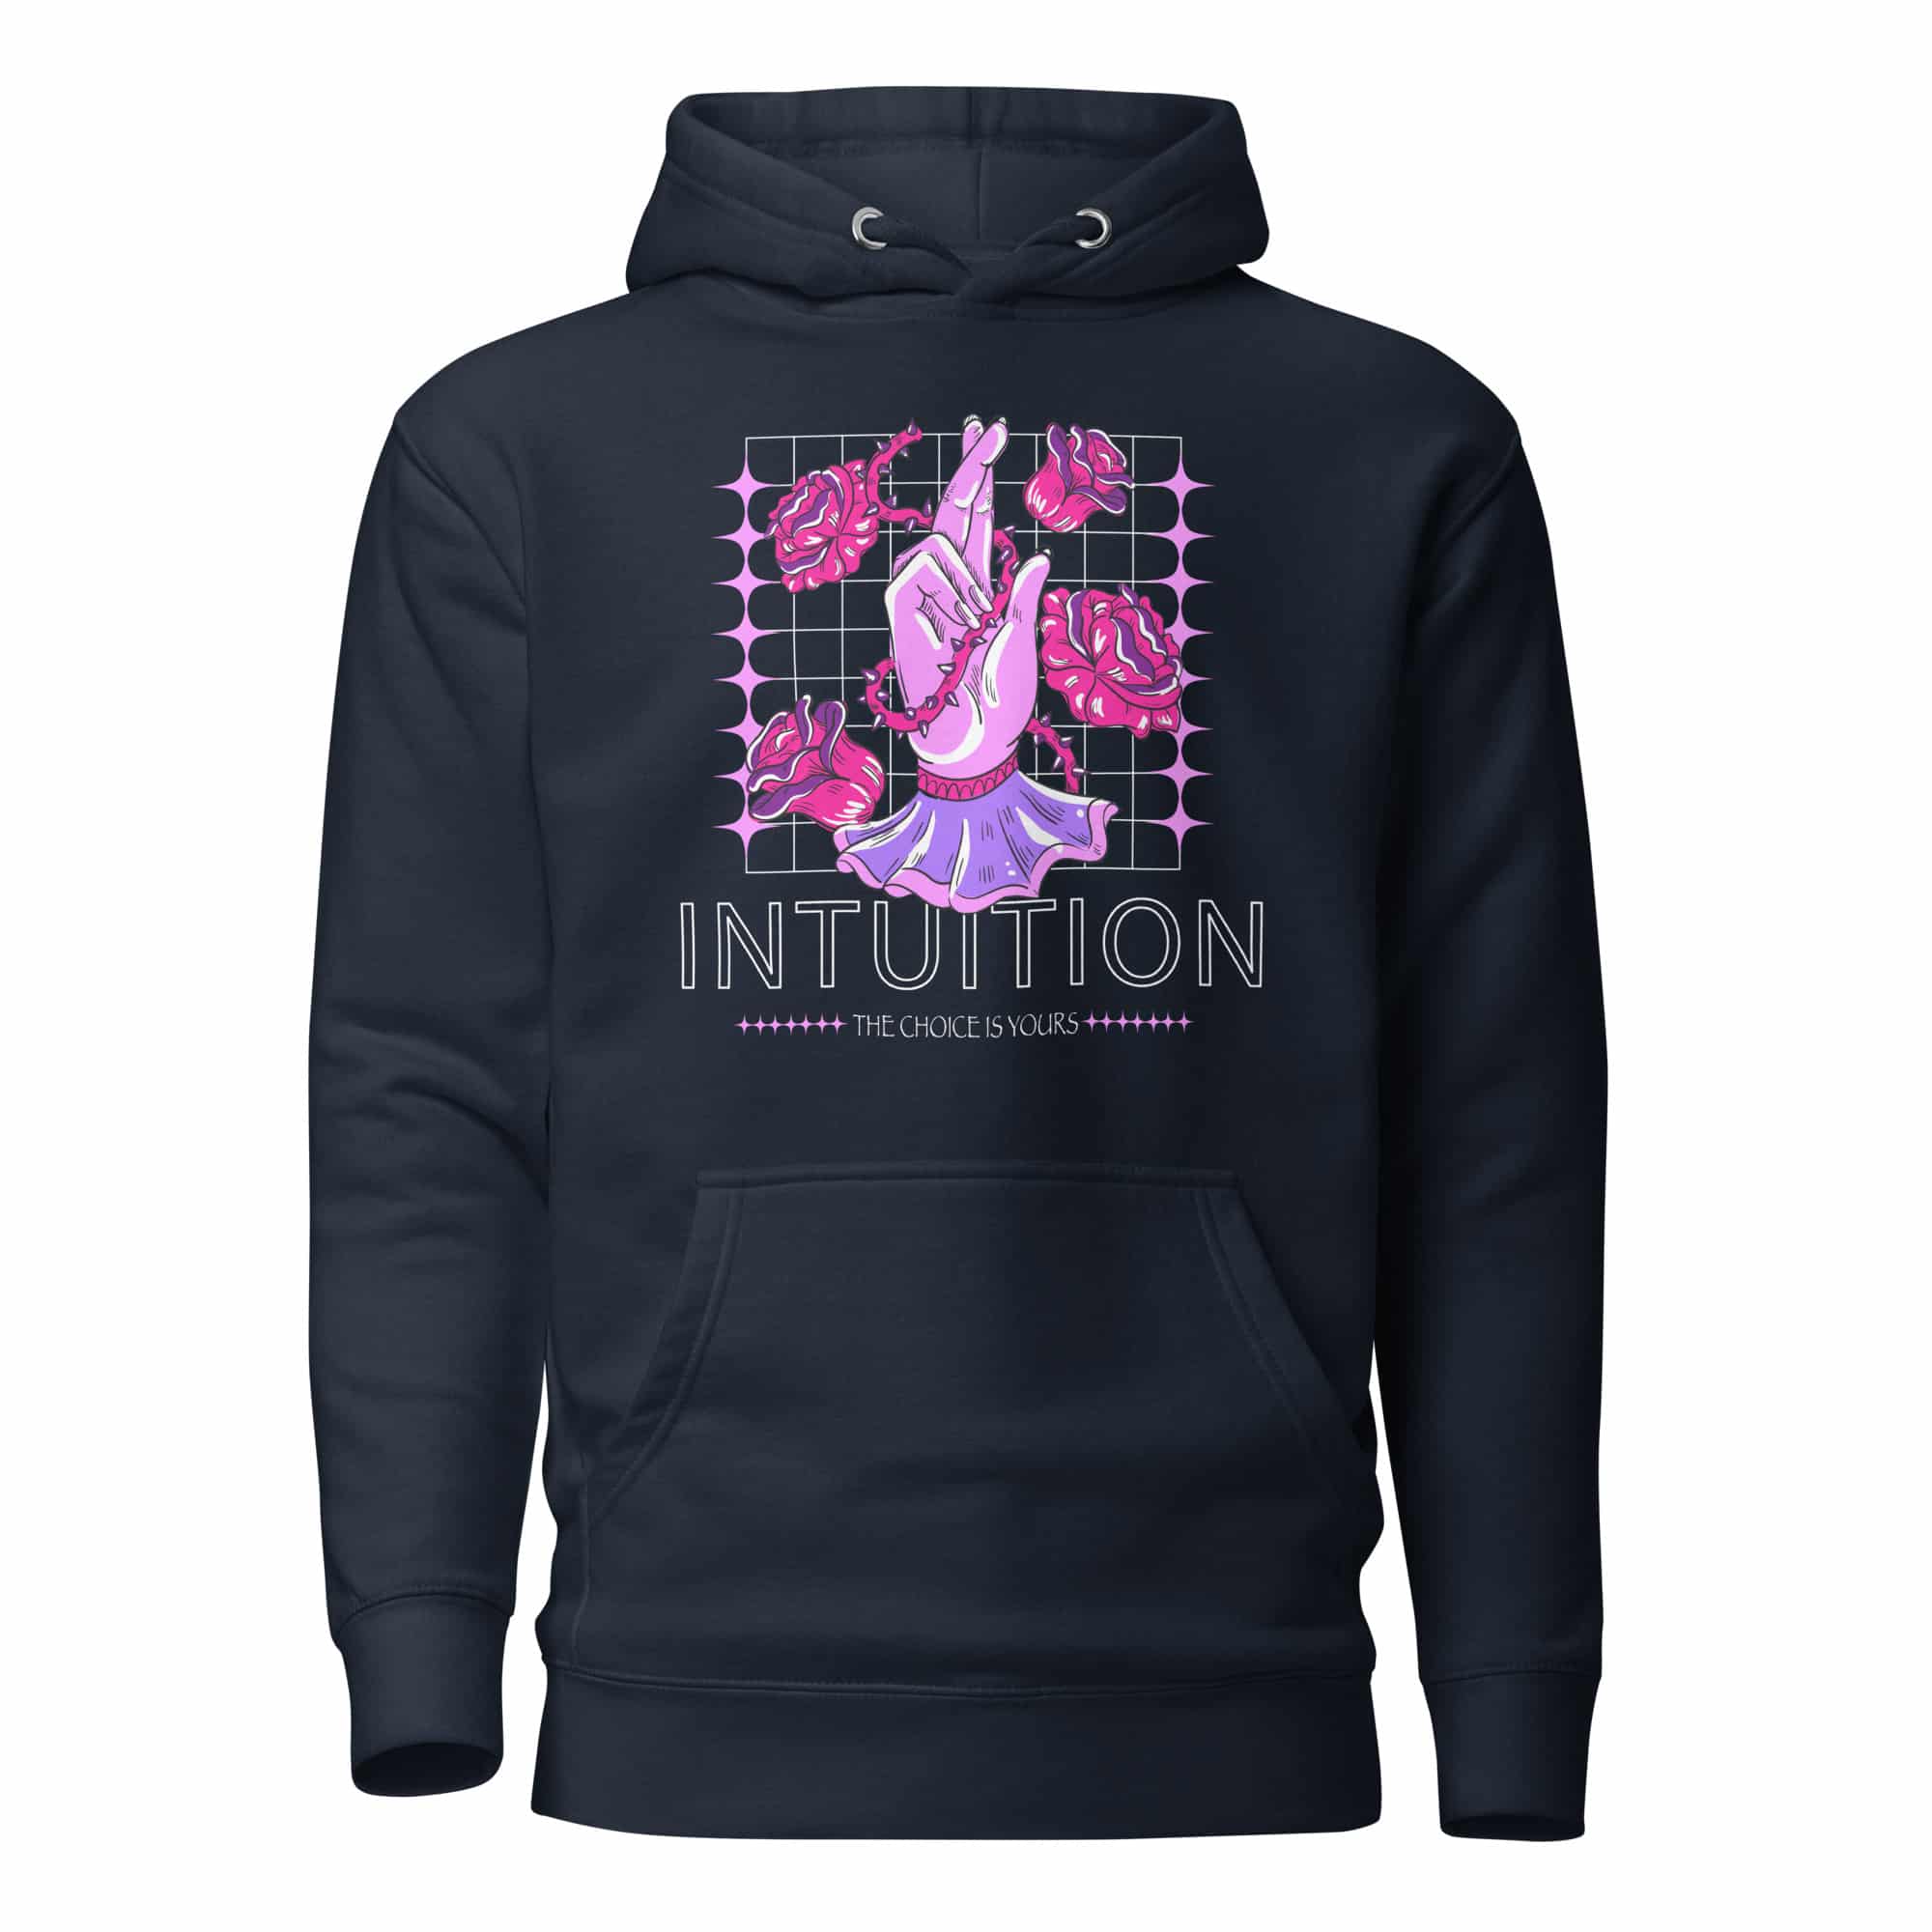 Intuition Unisex Hoodie Men's graphic t-shirts Men's designer shirts Premium sweatshirts Unisex hoodies Premium hooded sweatshirts Designer sweatshirts High-quality sweatshirts Luxury sweatshirts Unisex fleece sweatshirts Premium pullover sweatshirts Unisex heavyweight sweatshirts Premium cotton sweatshirts Video game store Gaming merchandise Gaming accessories shop Online gaming store Video game shop near me Gaming console store PC gaming store Gaming gear shop Retro gaming shop Board game shop Anime merchandise Anime store online Japanese anime shop Anime figurines Manga shop Anime DVDs Anime accessories Anime apparel Anime collectibles Anime gifts